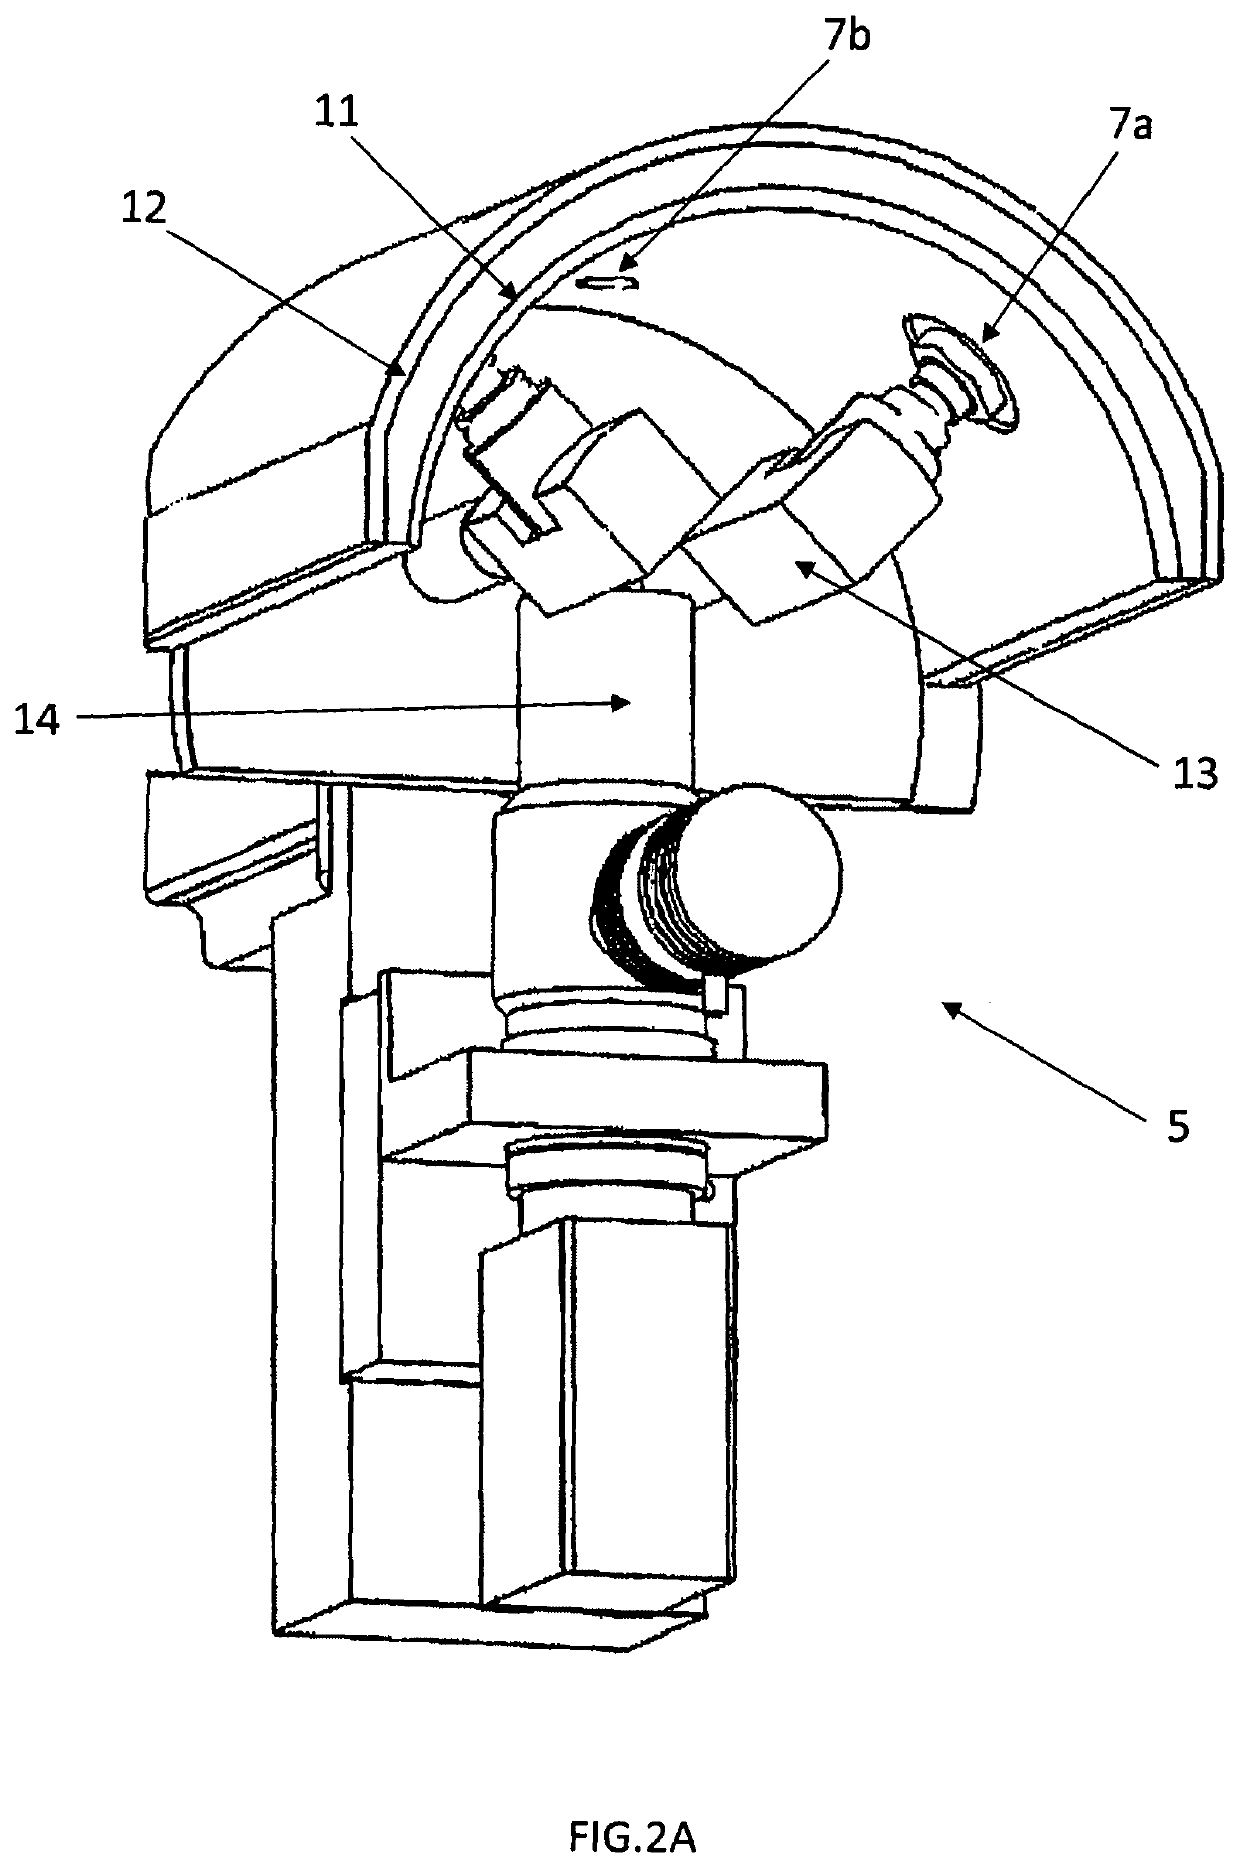 Apparatus and method for mounting a flexible plate